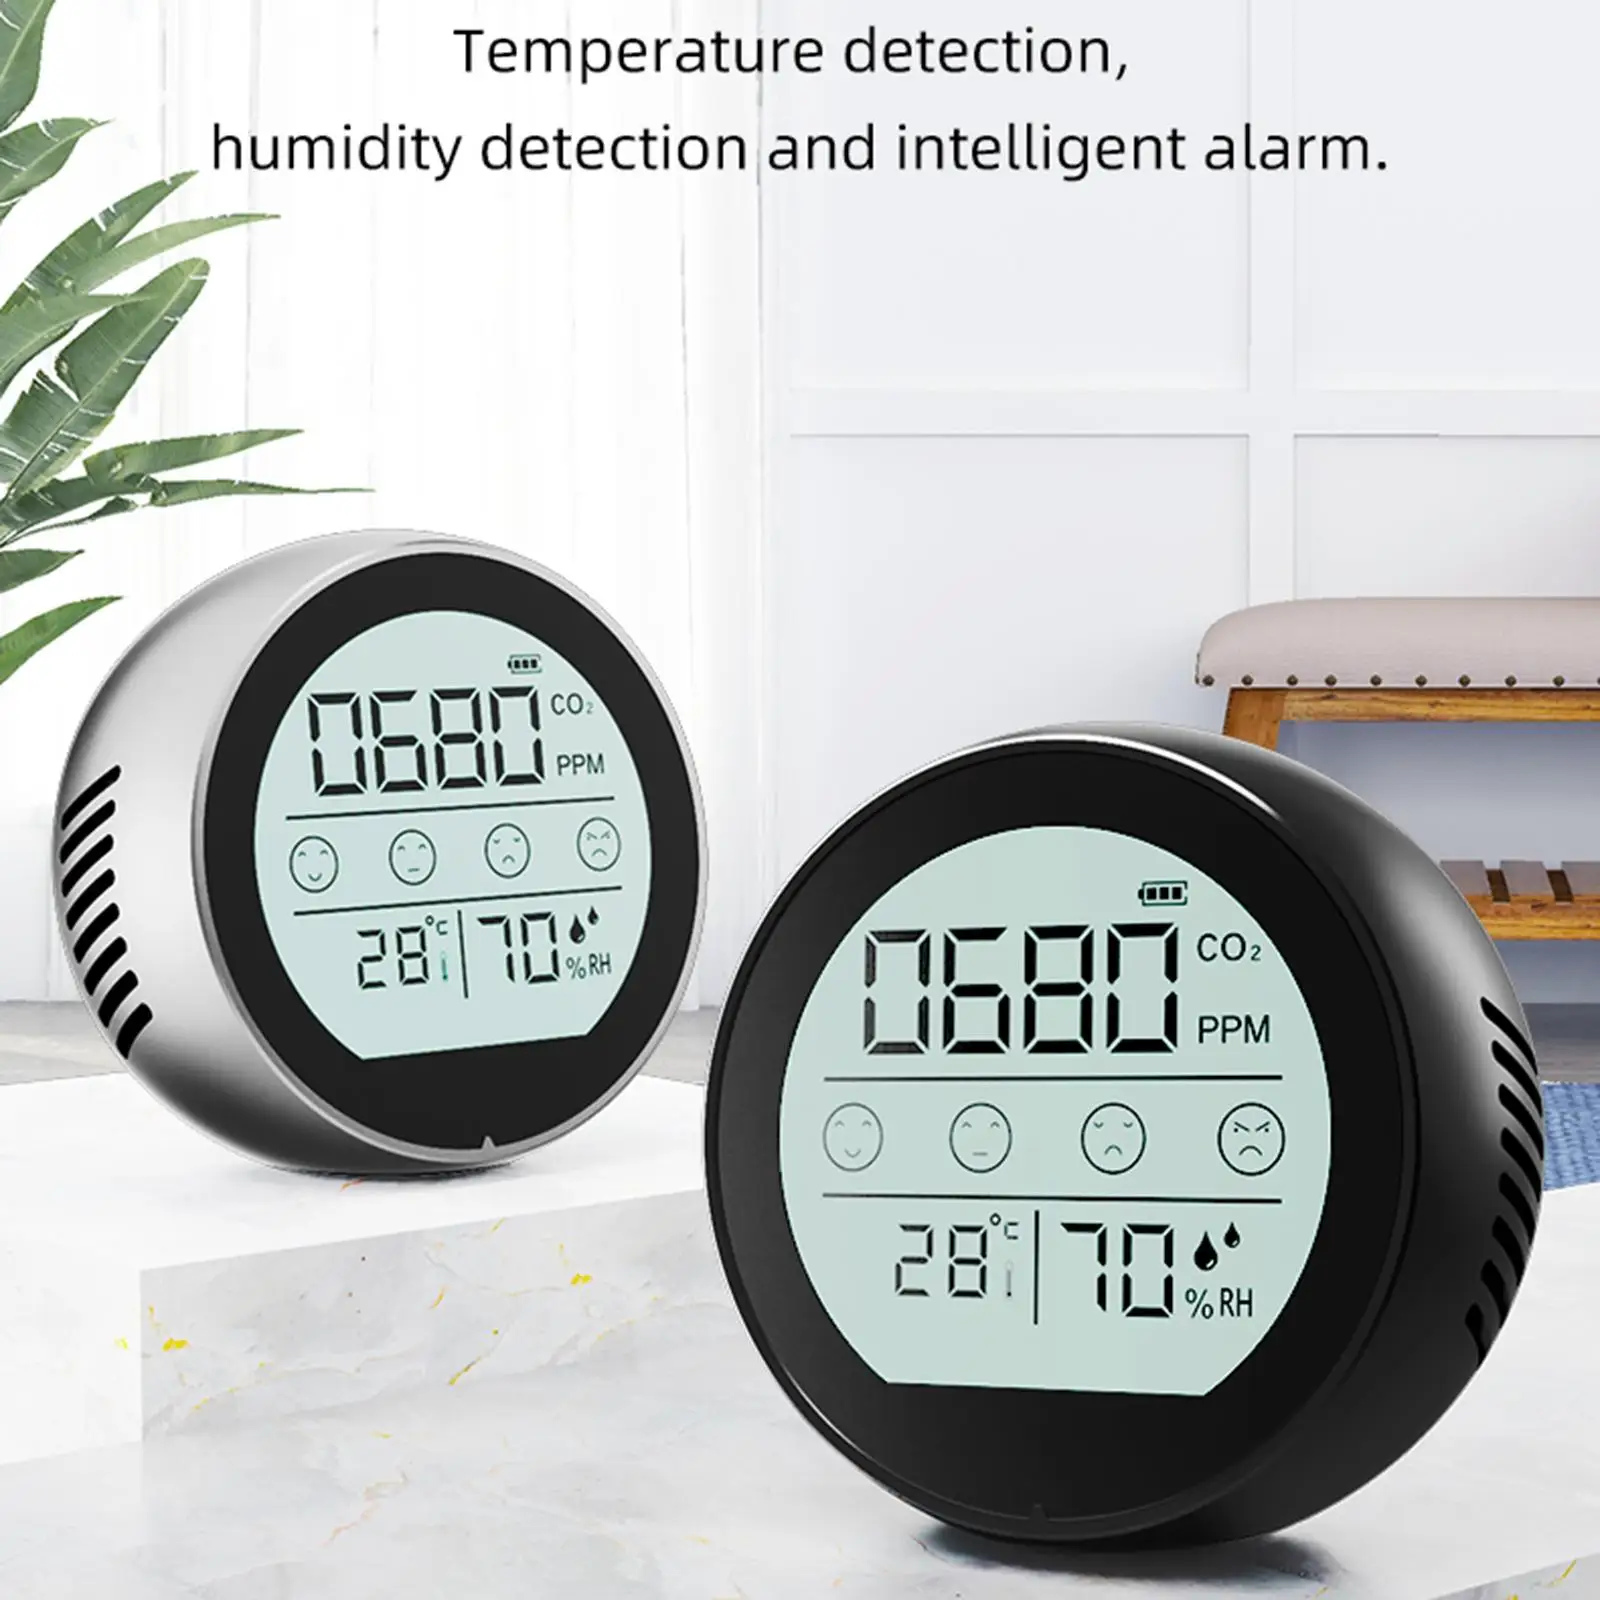  Dioxide Monitor NDIR Sensor  Temperature Humidity Monitor for Workplace